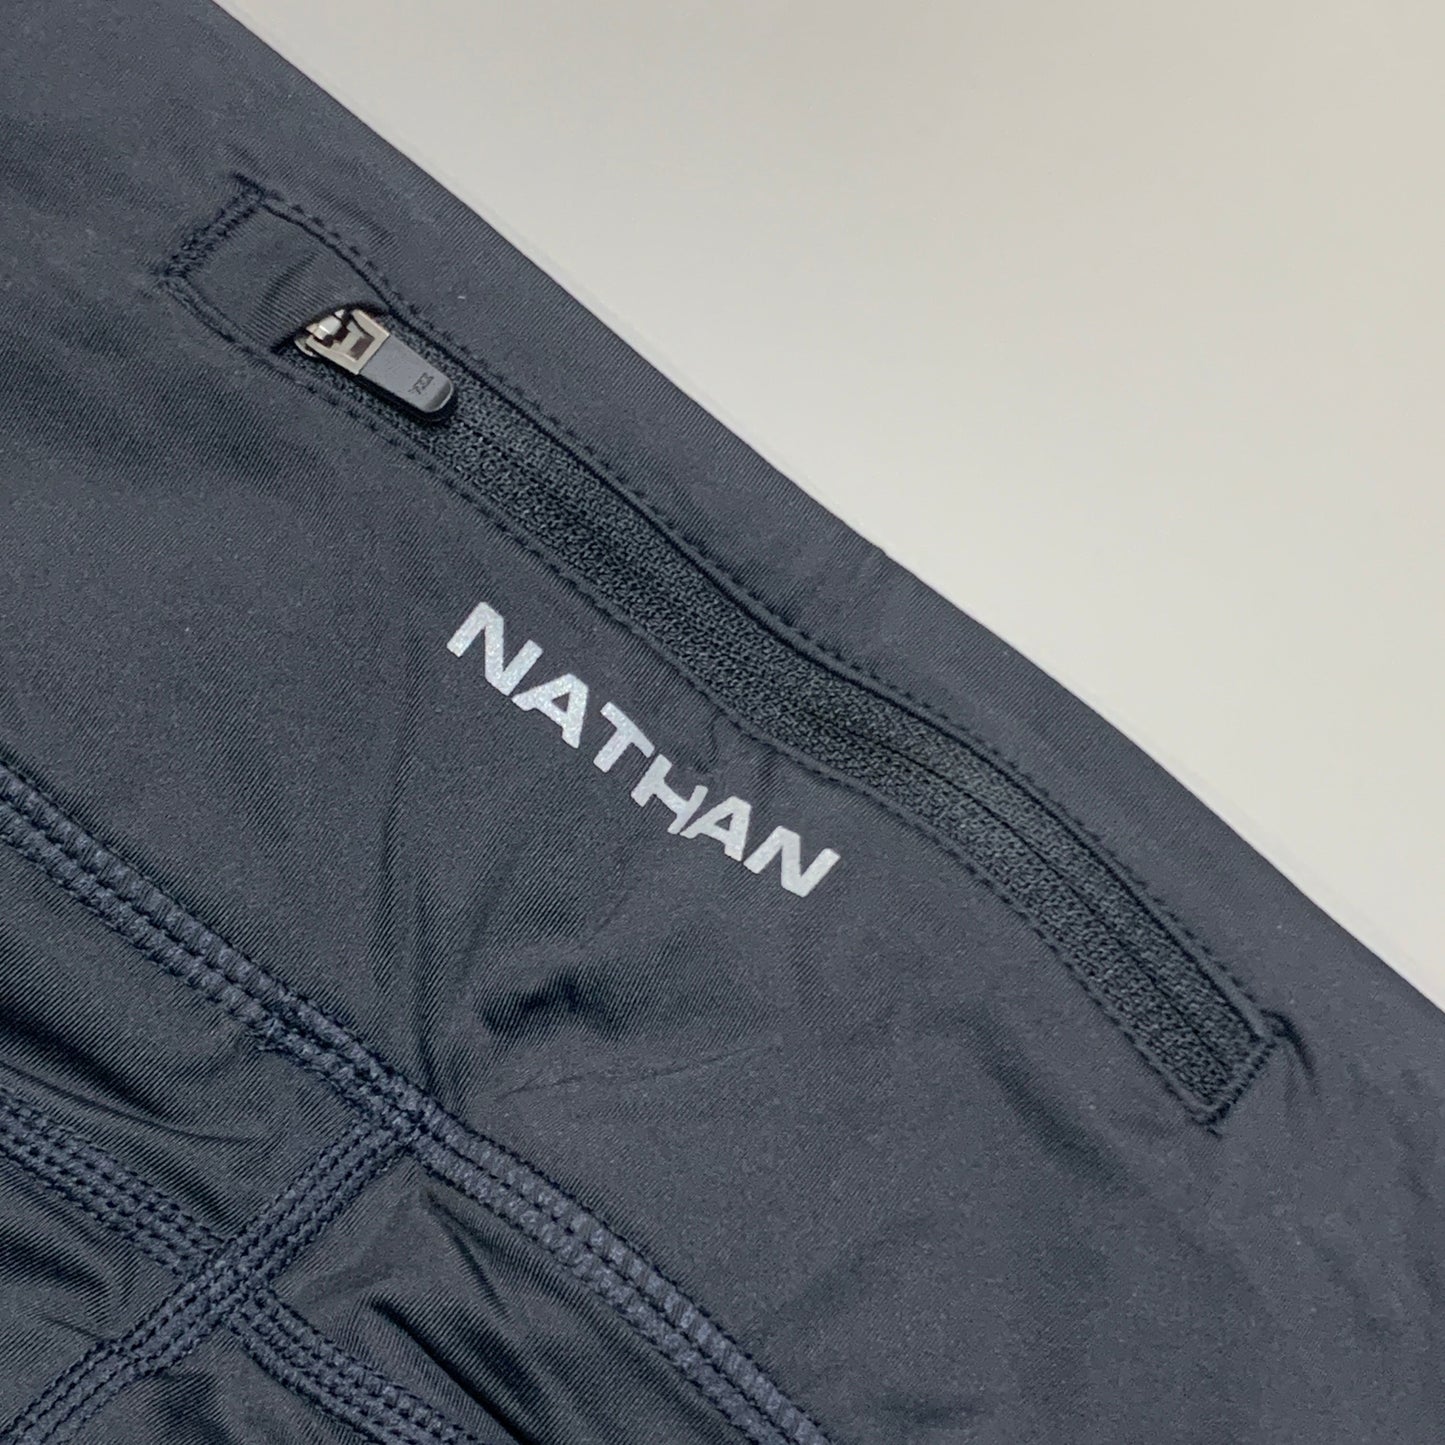 NATHAN Interval 3" Inseam Bike Short Women's Black Size Small NS51040-00001-S